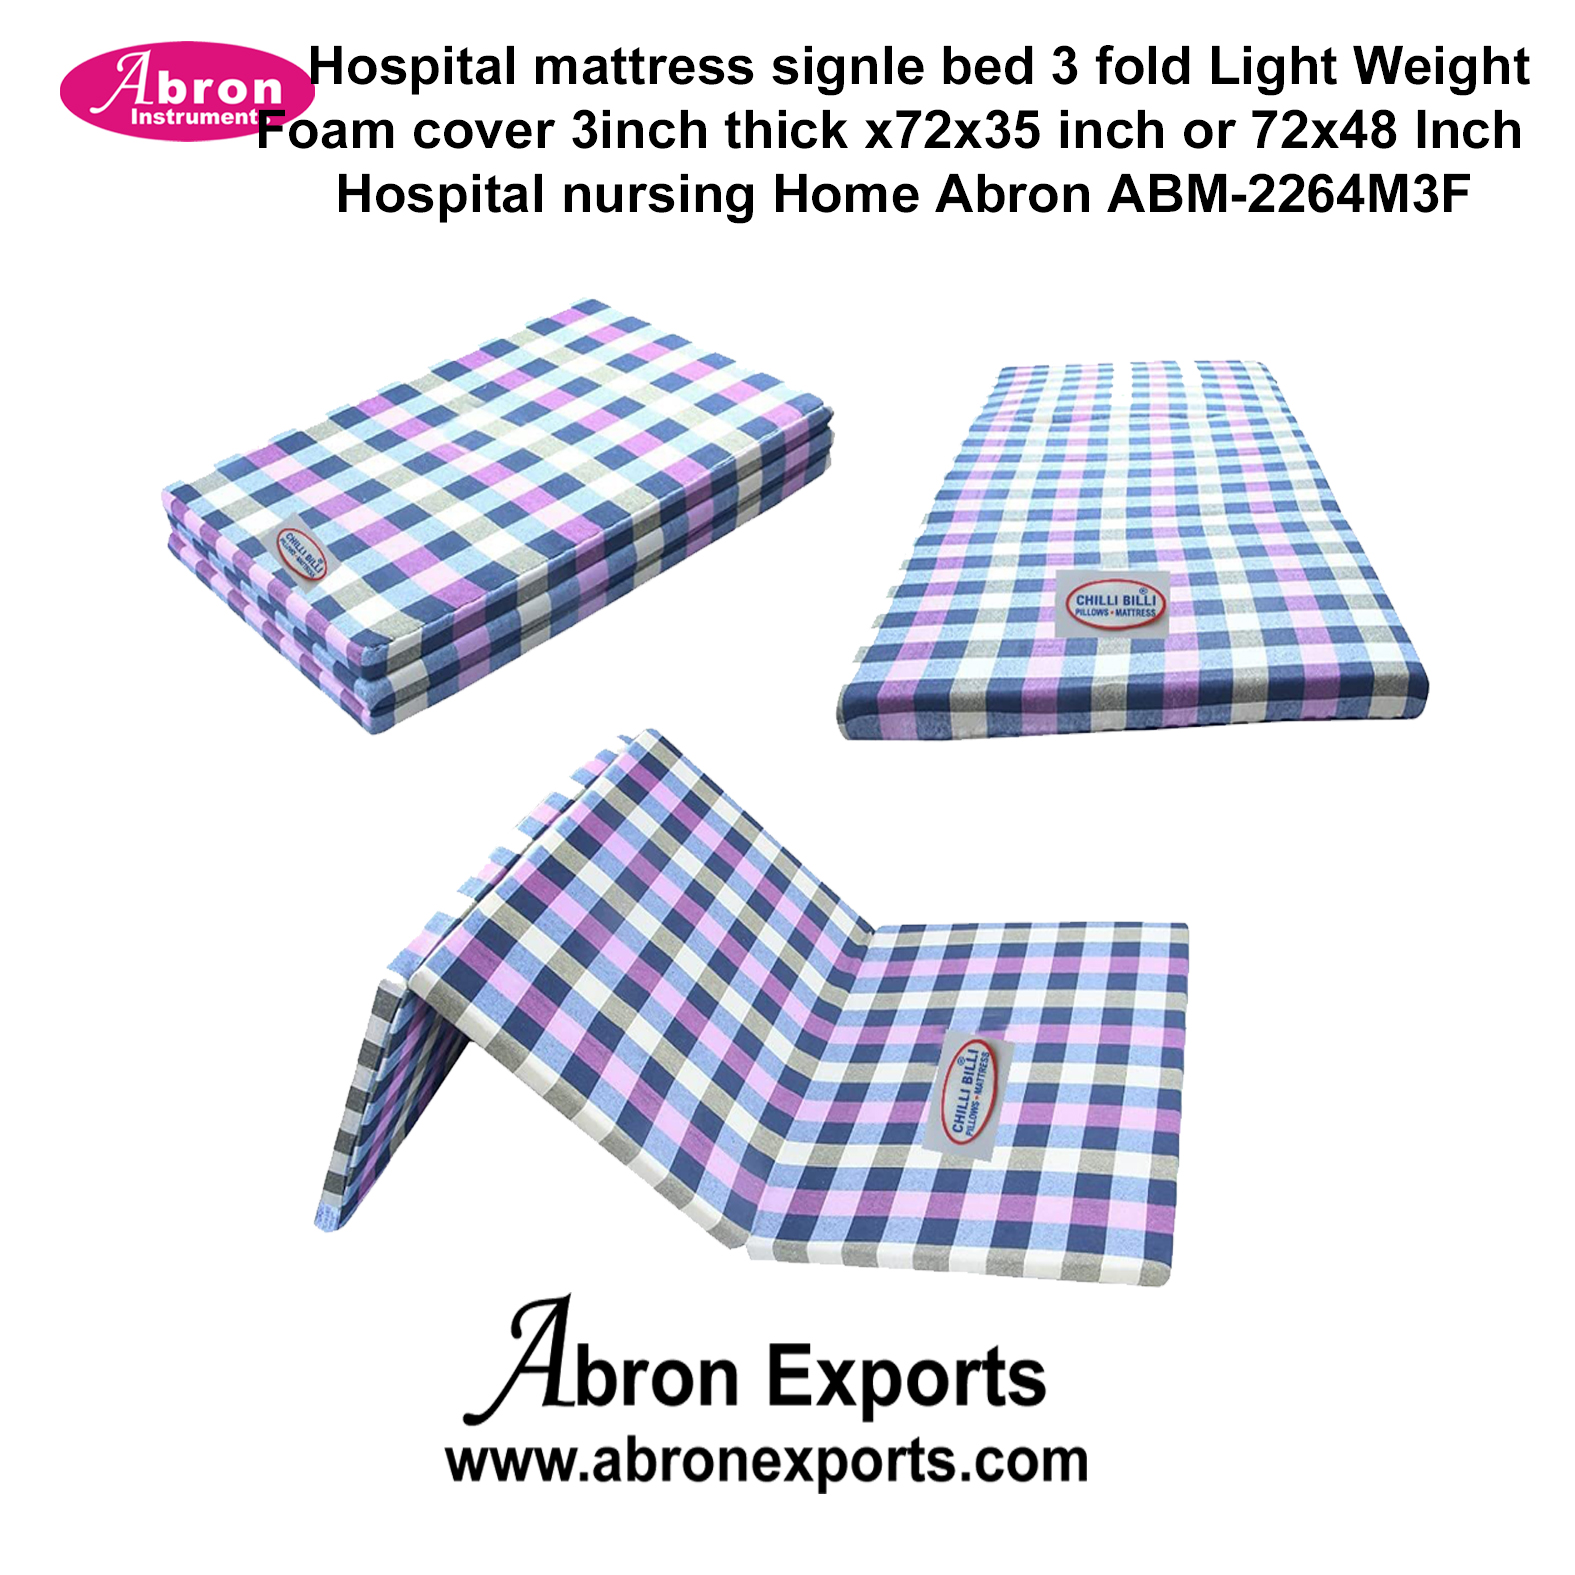 Hospital mattress Signle Bed 3 Fold Light Weight Foam Cover 3 inch Thick x72x35 inch or 72x48 Inch Hospital Nursing Home Abron ABM-2264M3F